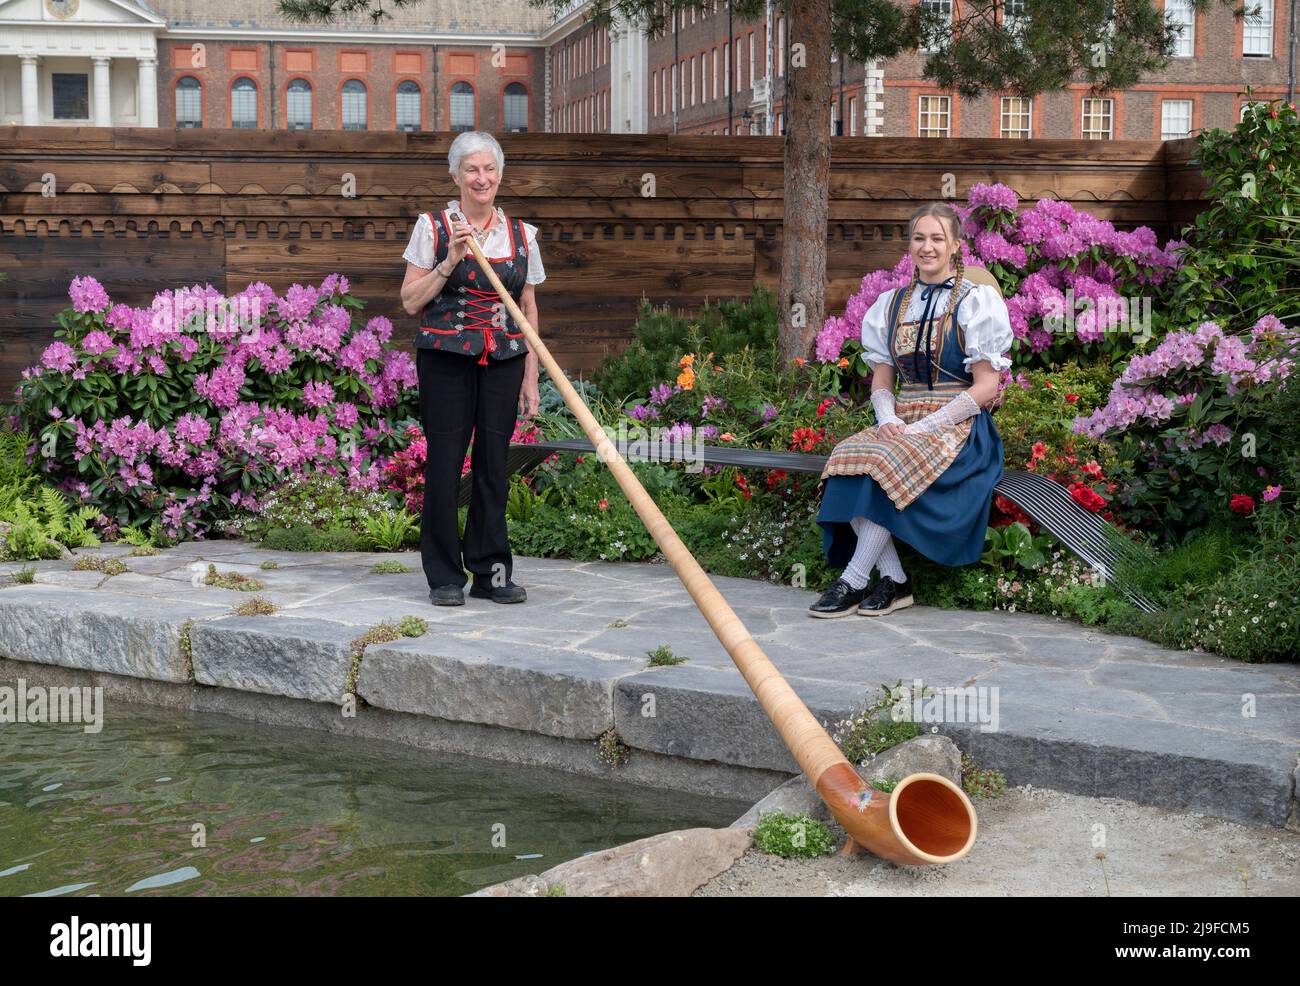 Royal Hospital, Chelsea, London, UK. 23 May 2022. The RHS Chelsea Flower show opens to the press back in it’s normal early Summer slot running from 24-28 May. Image: A Swiss Sanctuary Show Garden with Alpenhorn player dressed in traditional swiss attire. Credit: Malcolm Park/Alamy Live News. Stock Photo